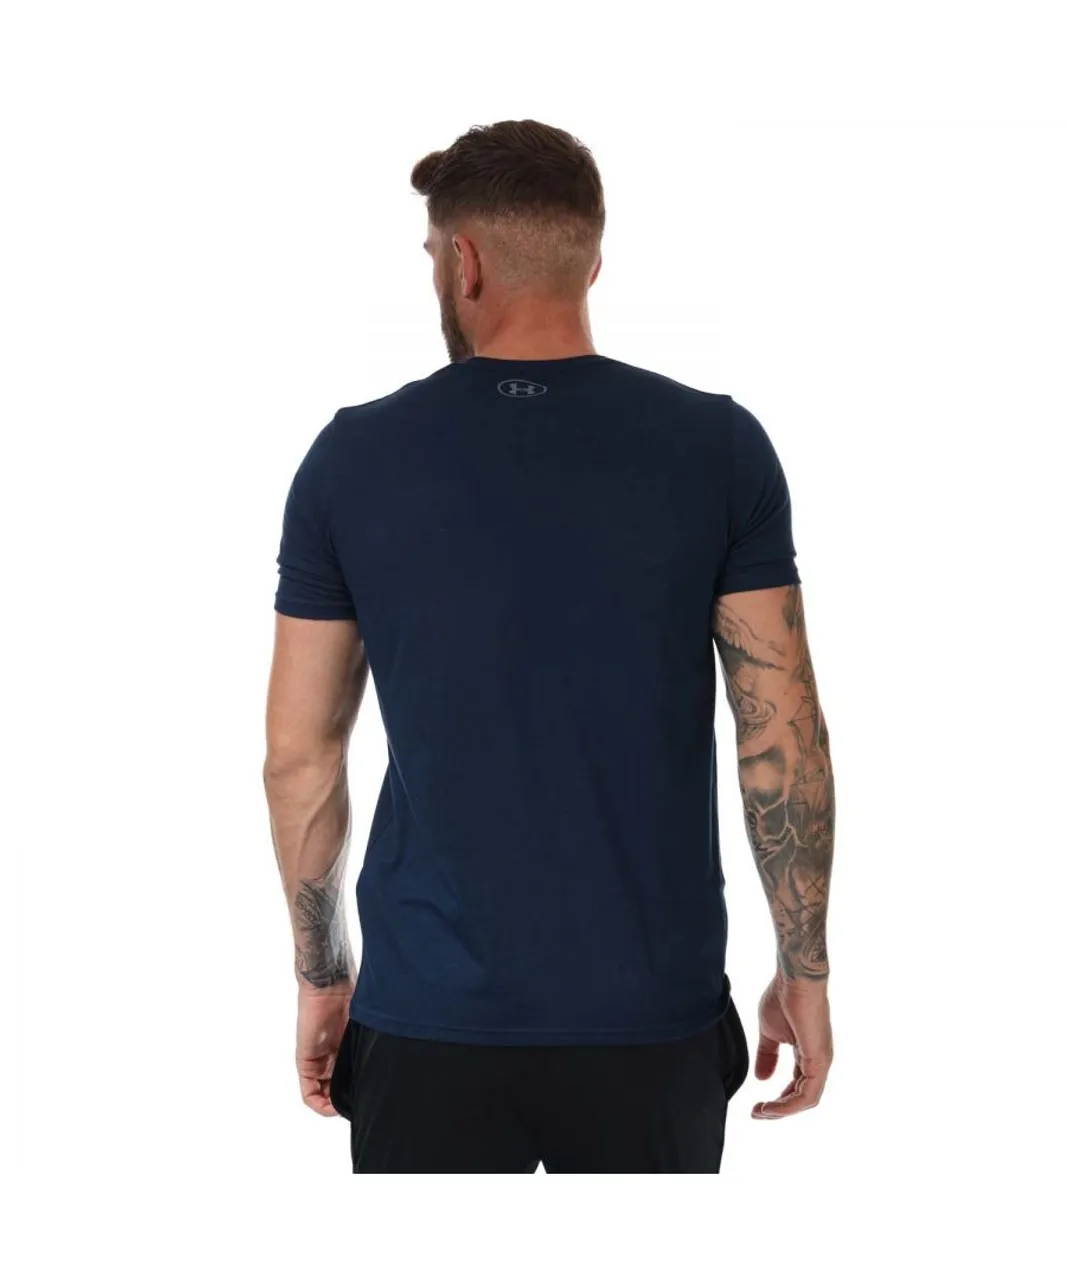 Under Armour Mens Sportstyle Left Chest Short Sleeve T-Shirt in Navy Cotton